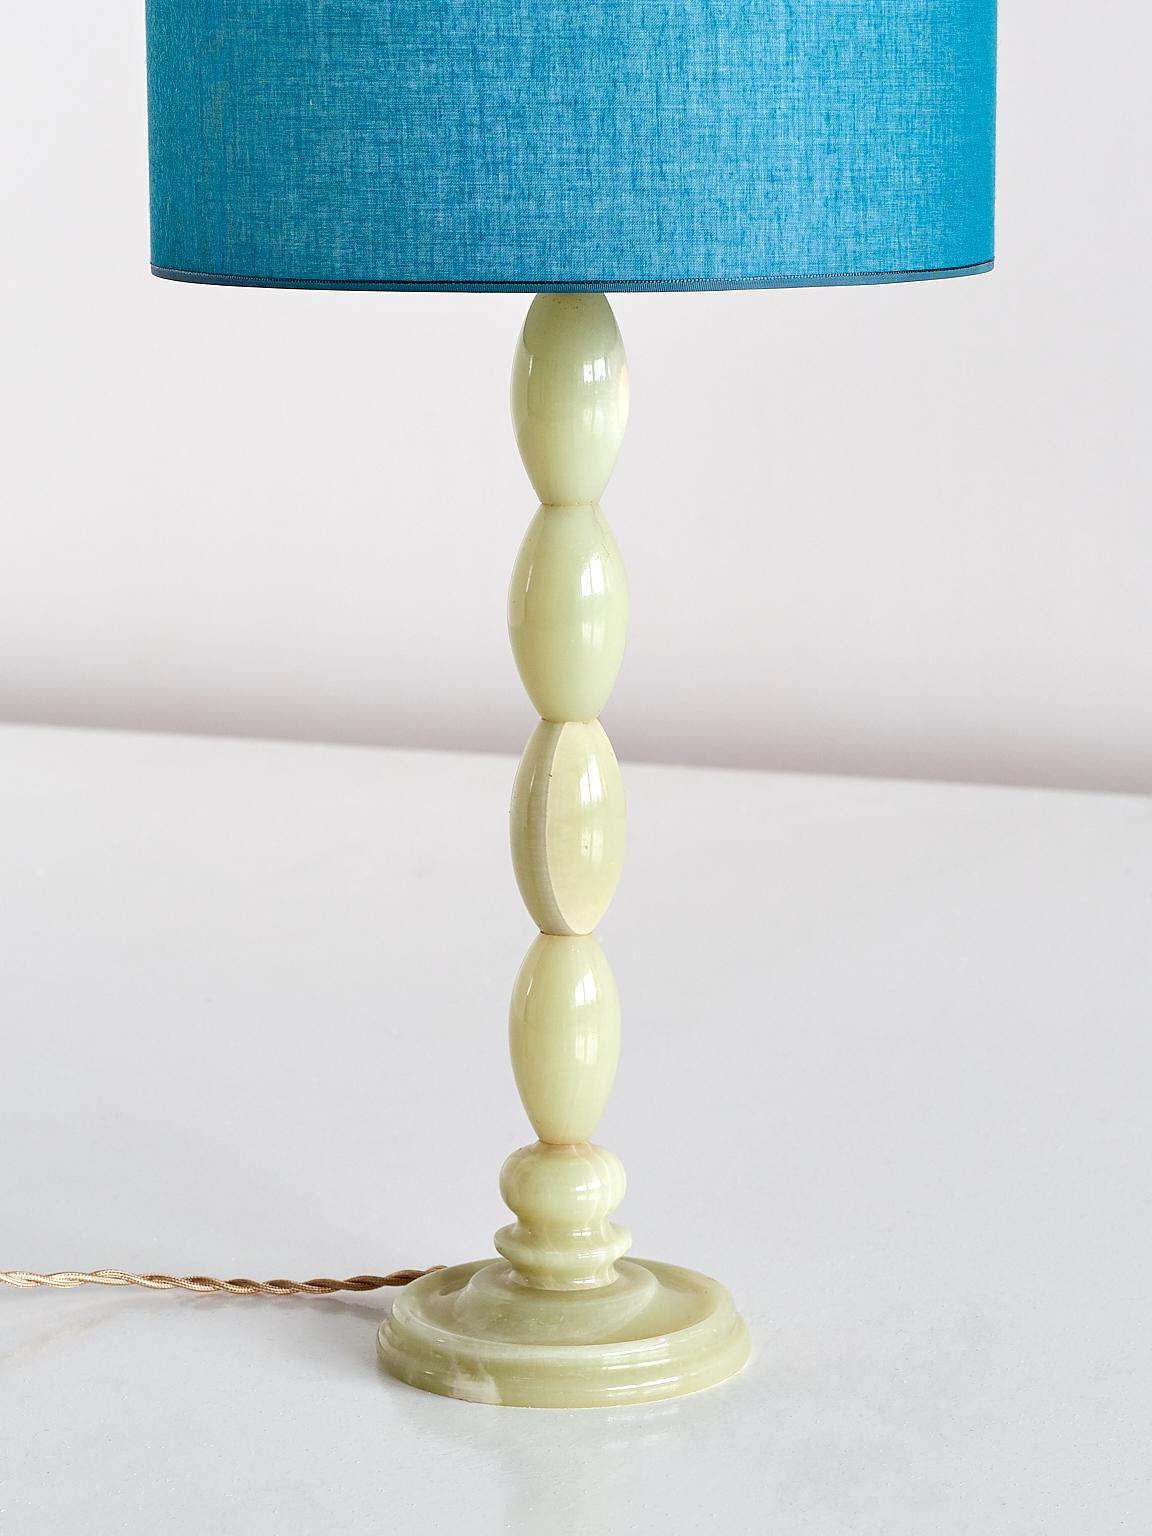 French Light Green Onyx Table Lamp with Stacked Oval Base and Blue Shade, France, 1970s